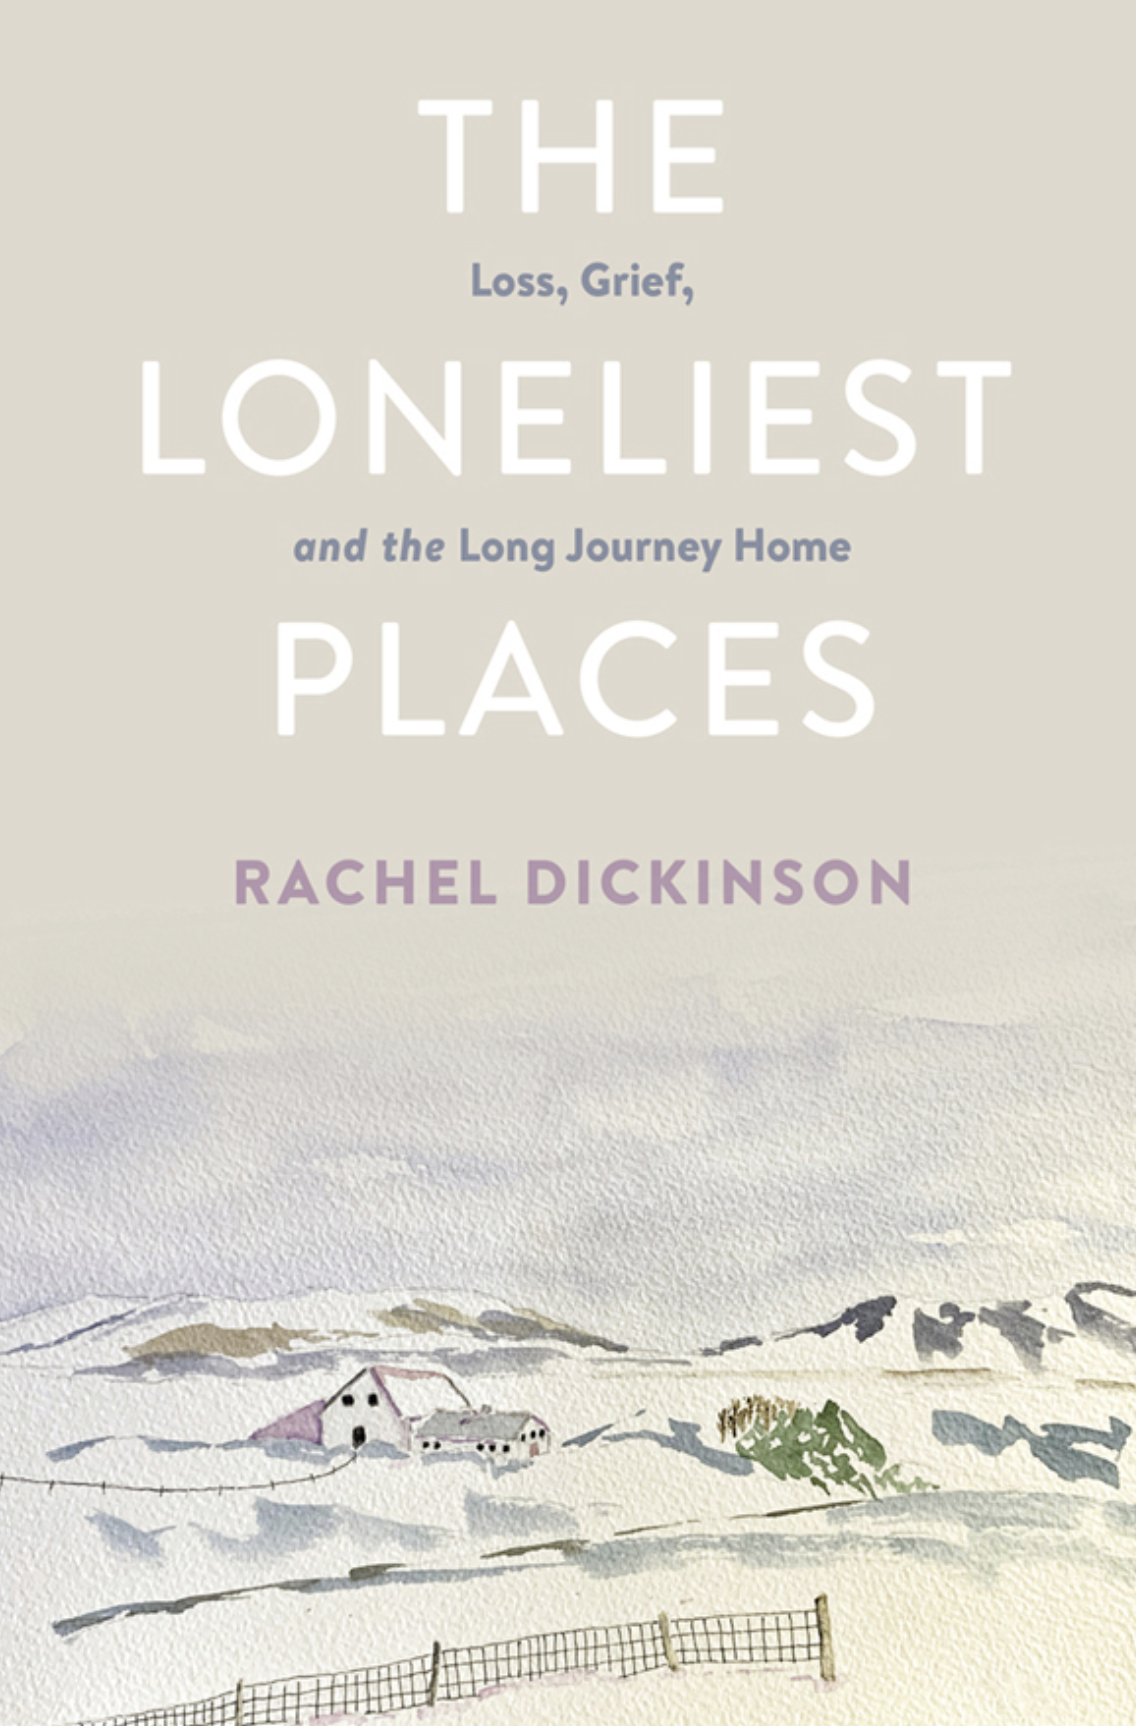 The Loneliest Places: Loss, Grief, and the Long Journey Home by Rachel Dickinson